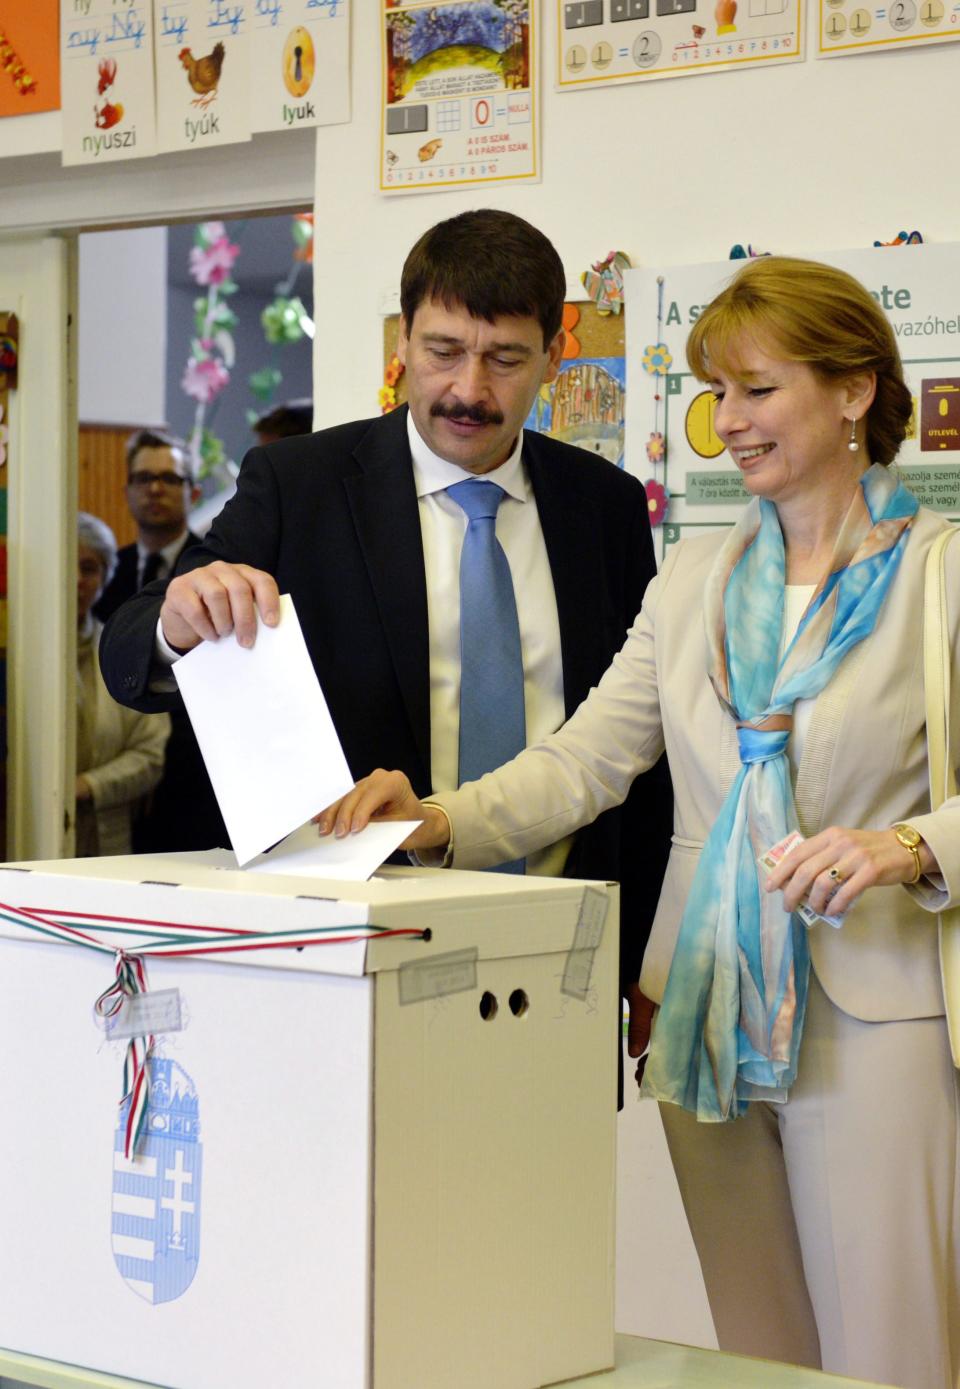 Hungarian President Janos Ader and his wife Anita Herczegh cast their vote at a polling station in Budapest during the parliamentary elections in Hungary, Sunday April 6, 2014. Hungary's governing party is tipped to win parliamentary elections Sunday, while a far-right party is expected to make further gains, according to polls. Prime Minister Viktor Orban's Fidesz party and its small ally, the Christian Democrats, are expected to win easily and they may even retain the two-thirds majority in the legislature gained in 2010 which allowed them to pass a new constitution, adopt unconventional economic policies, centralize power and grow the state's influence at the expense of the private sector. (AP Photo/Laszlo Beliczay)